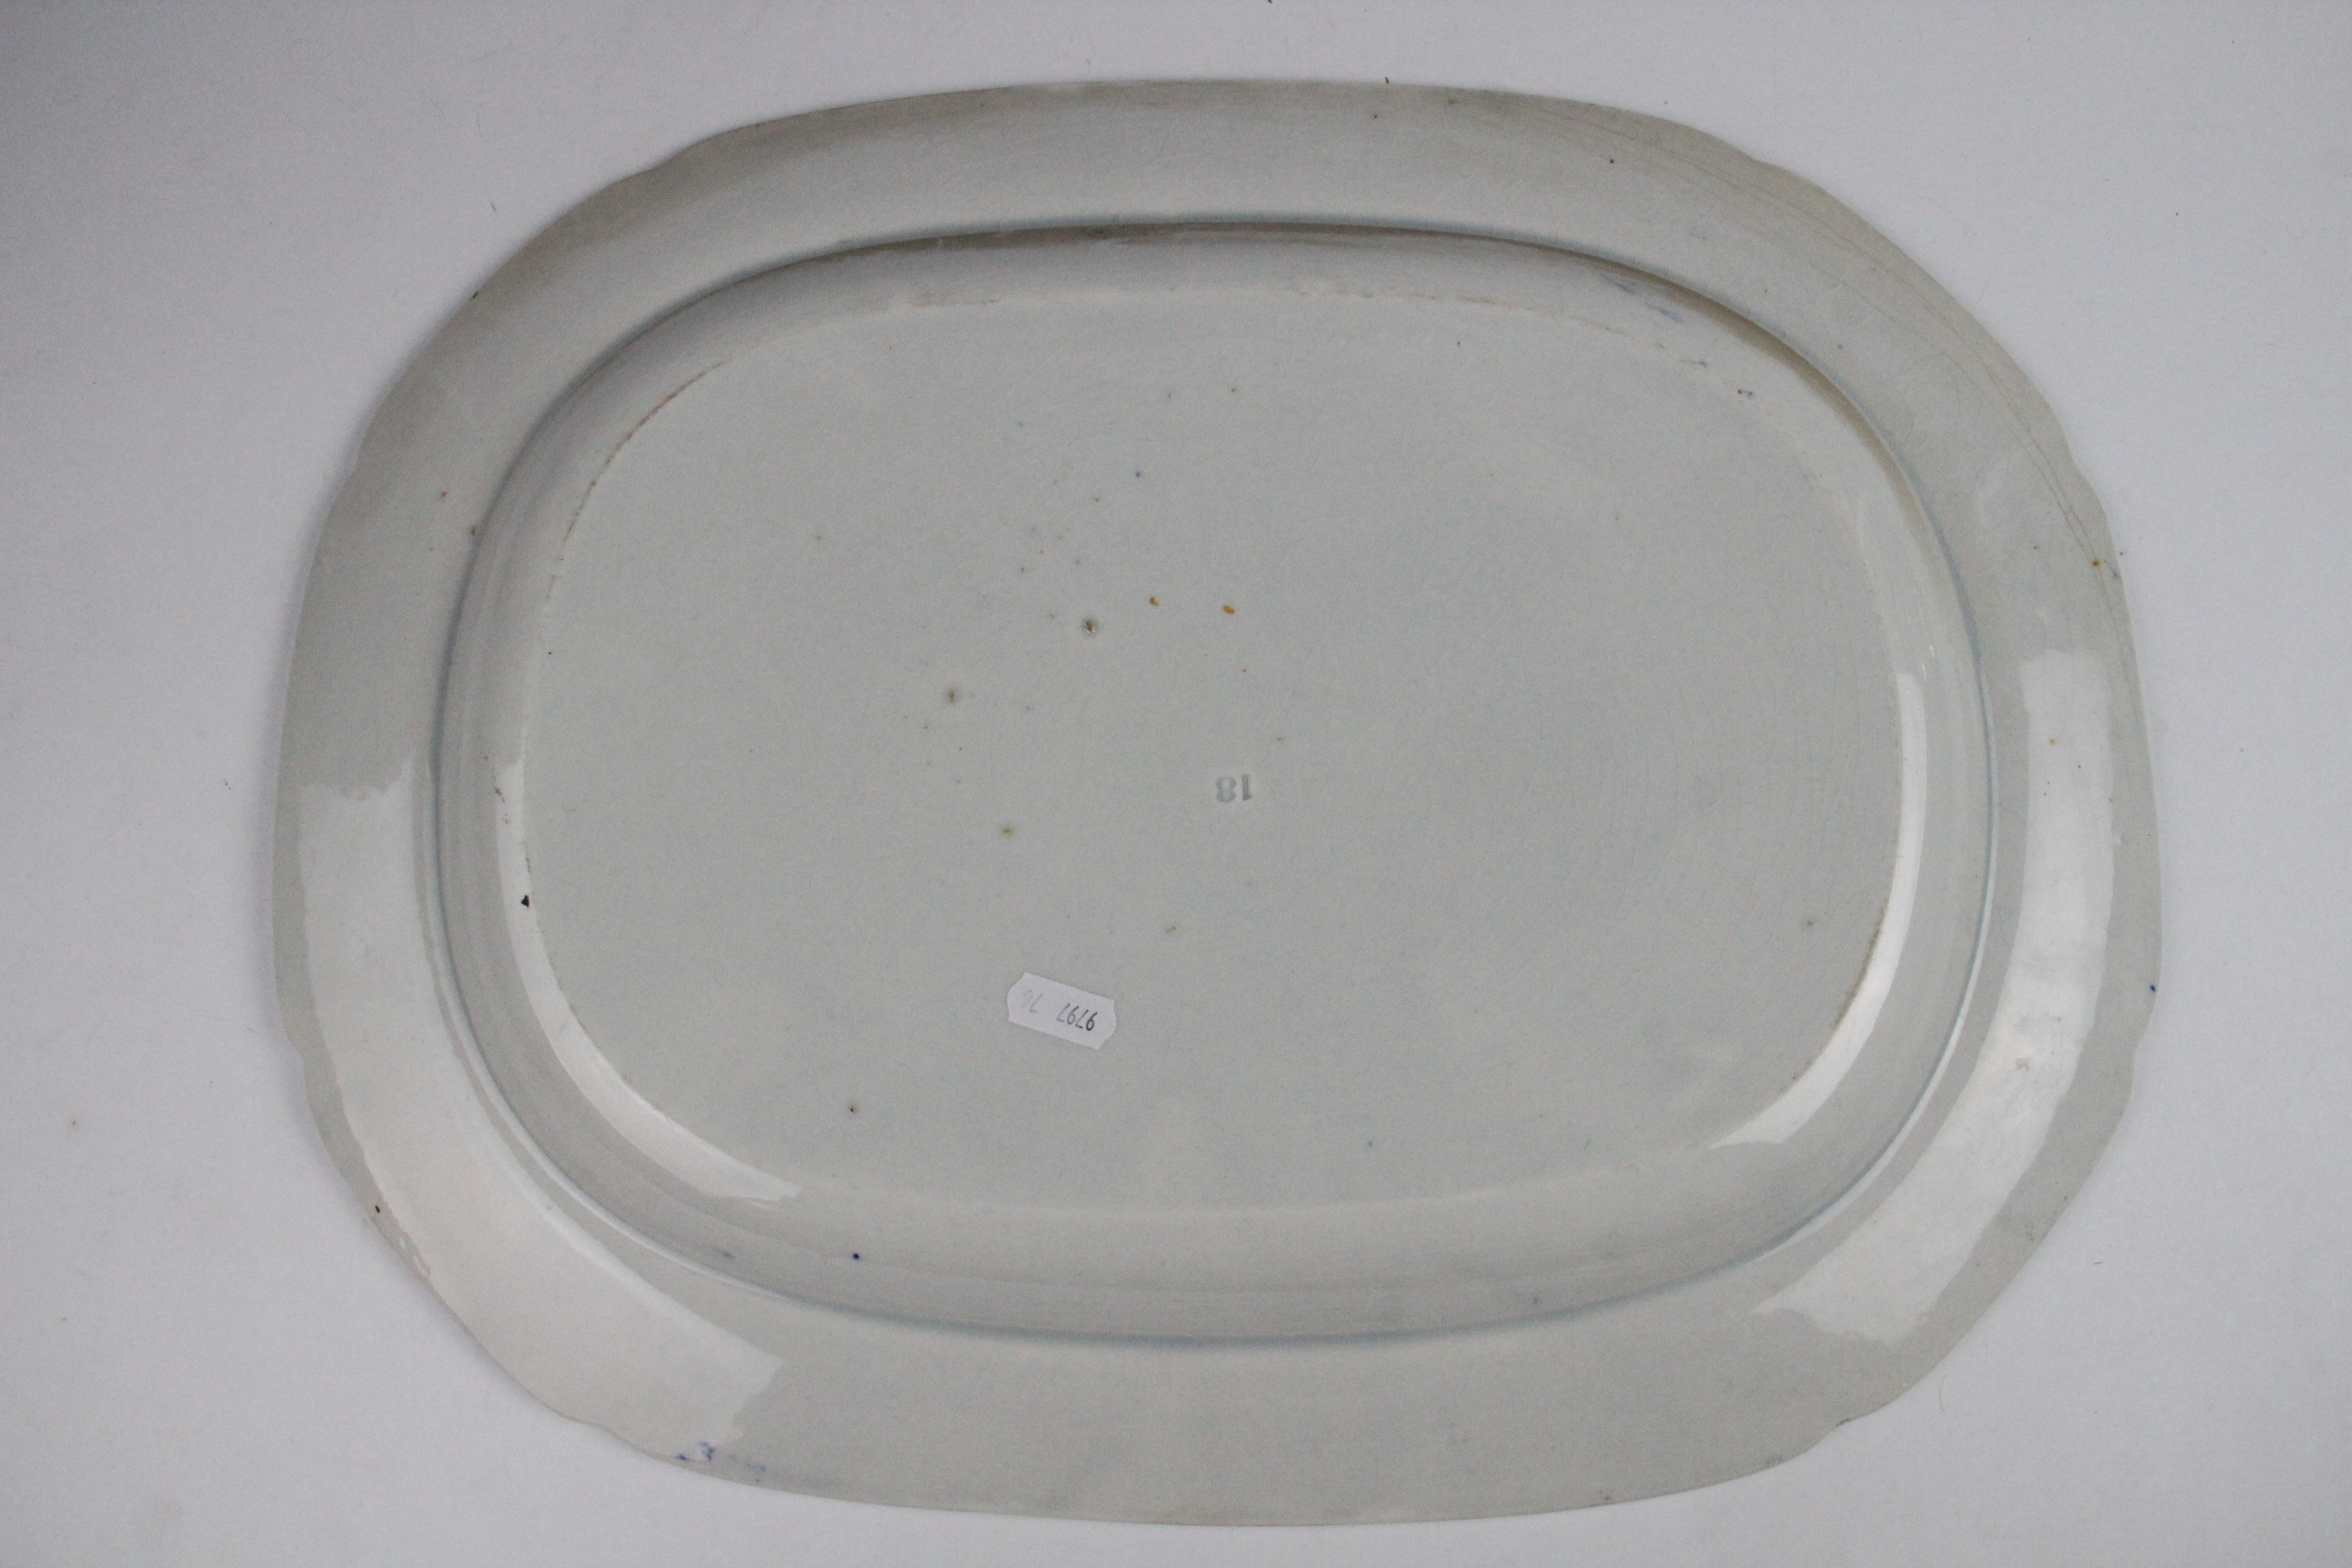 An Adams blue and white pearlware meat plate, 19th century, transfer printed with lions in a - Image 8 of 8